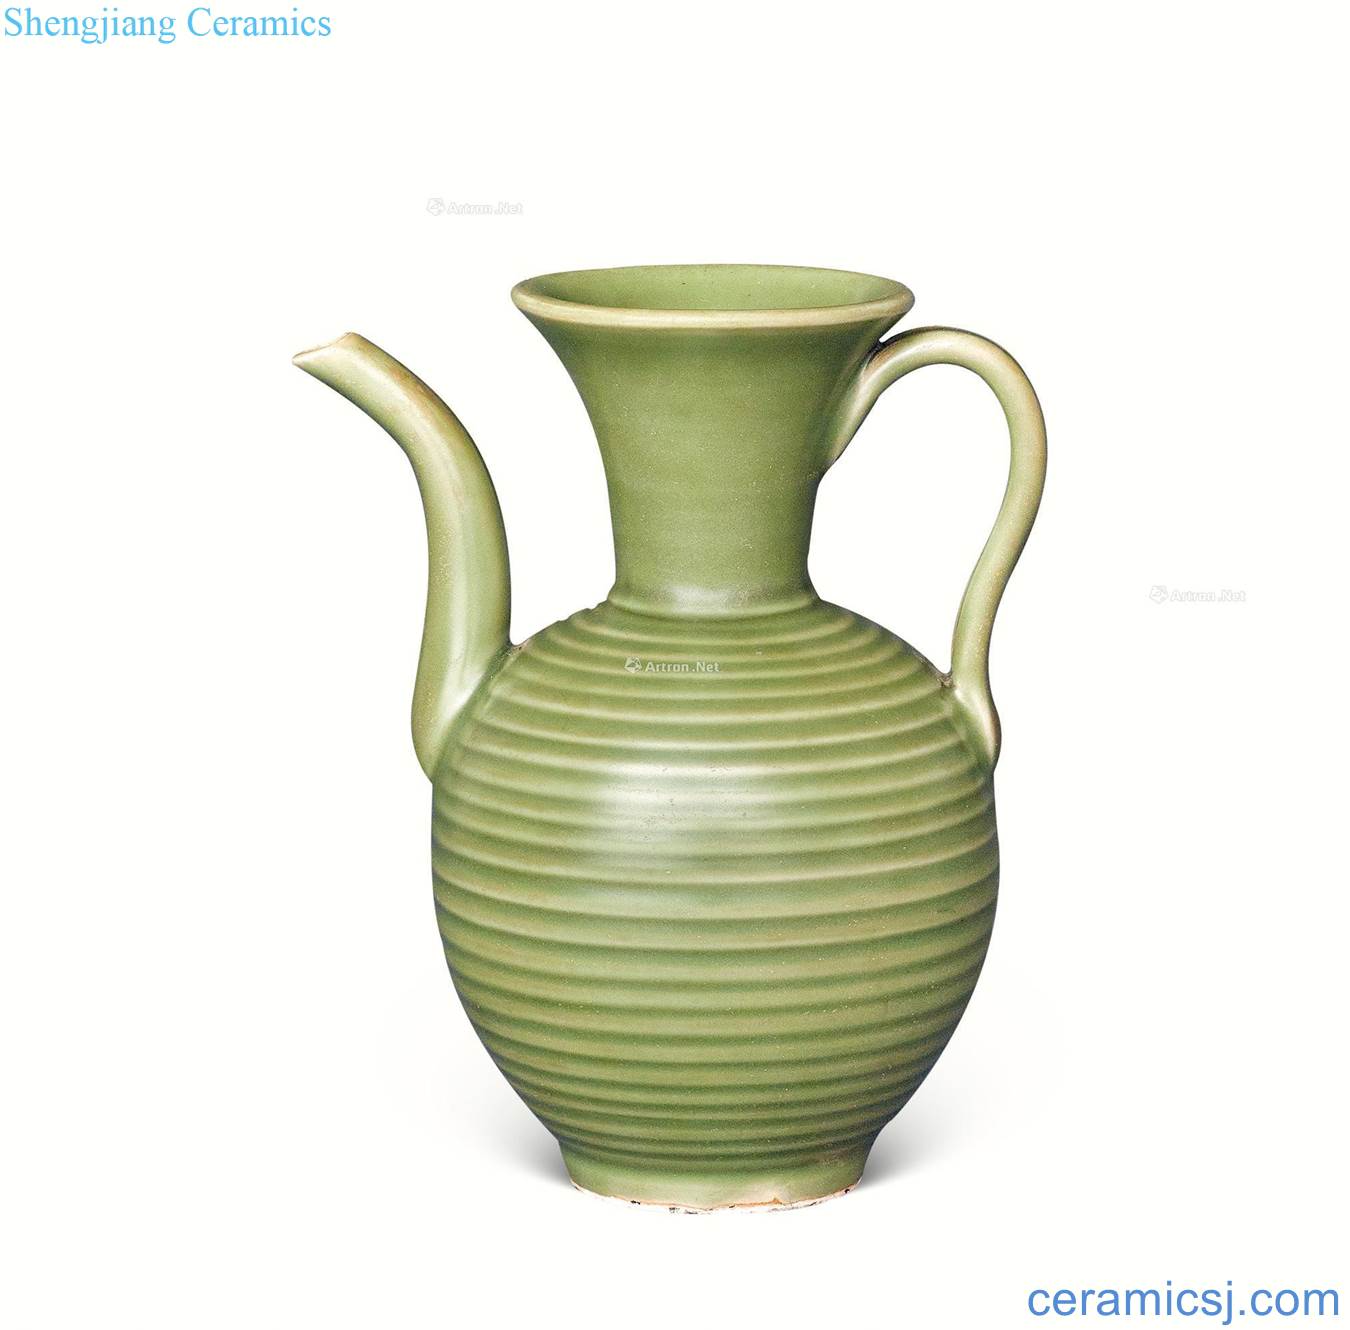 The song dynasty Longquan celadon glaze string lines ewer